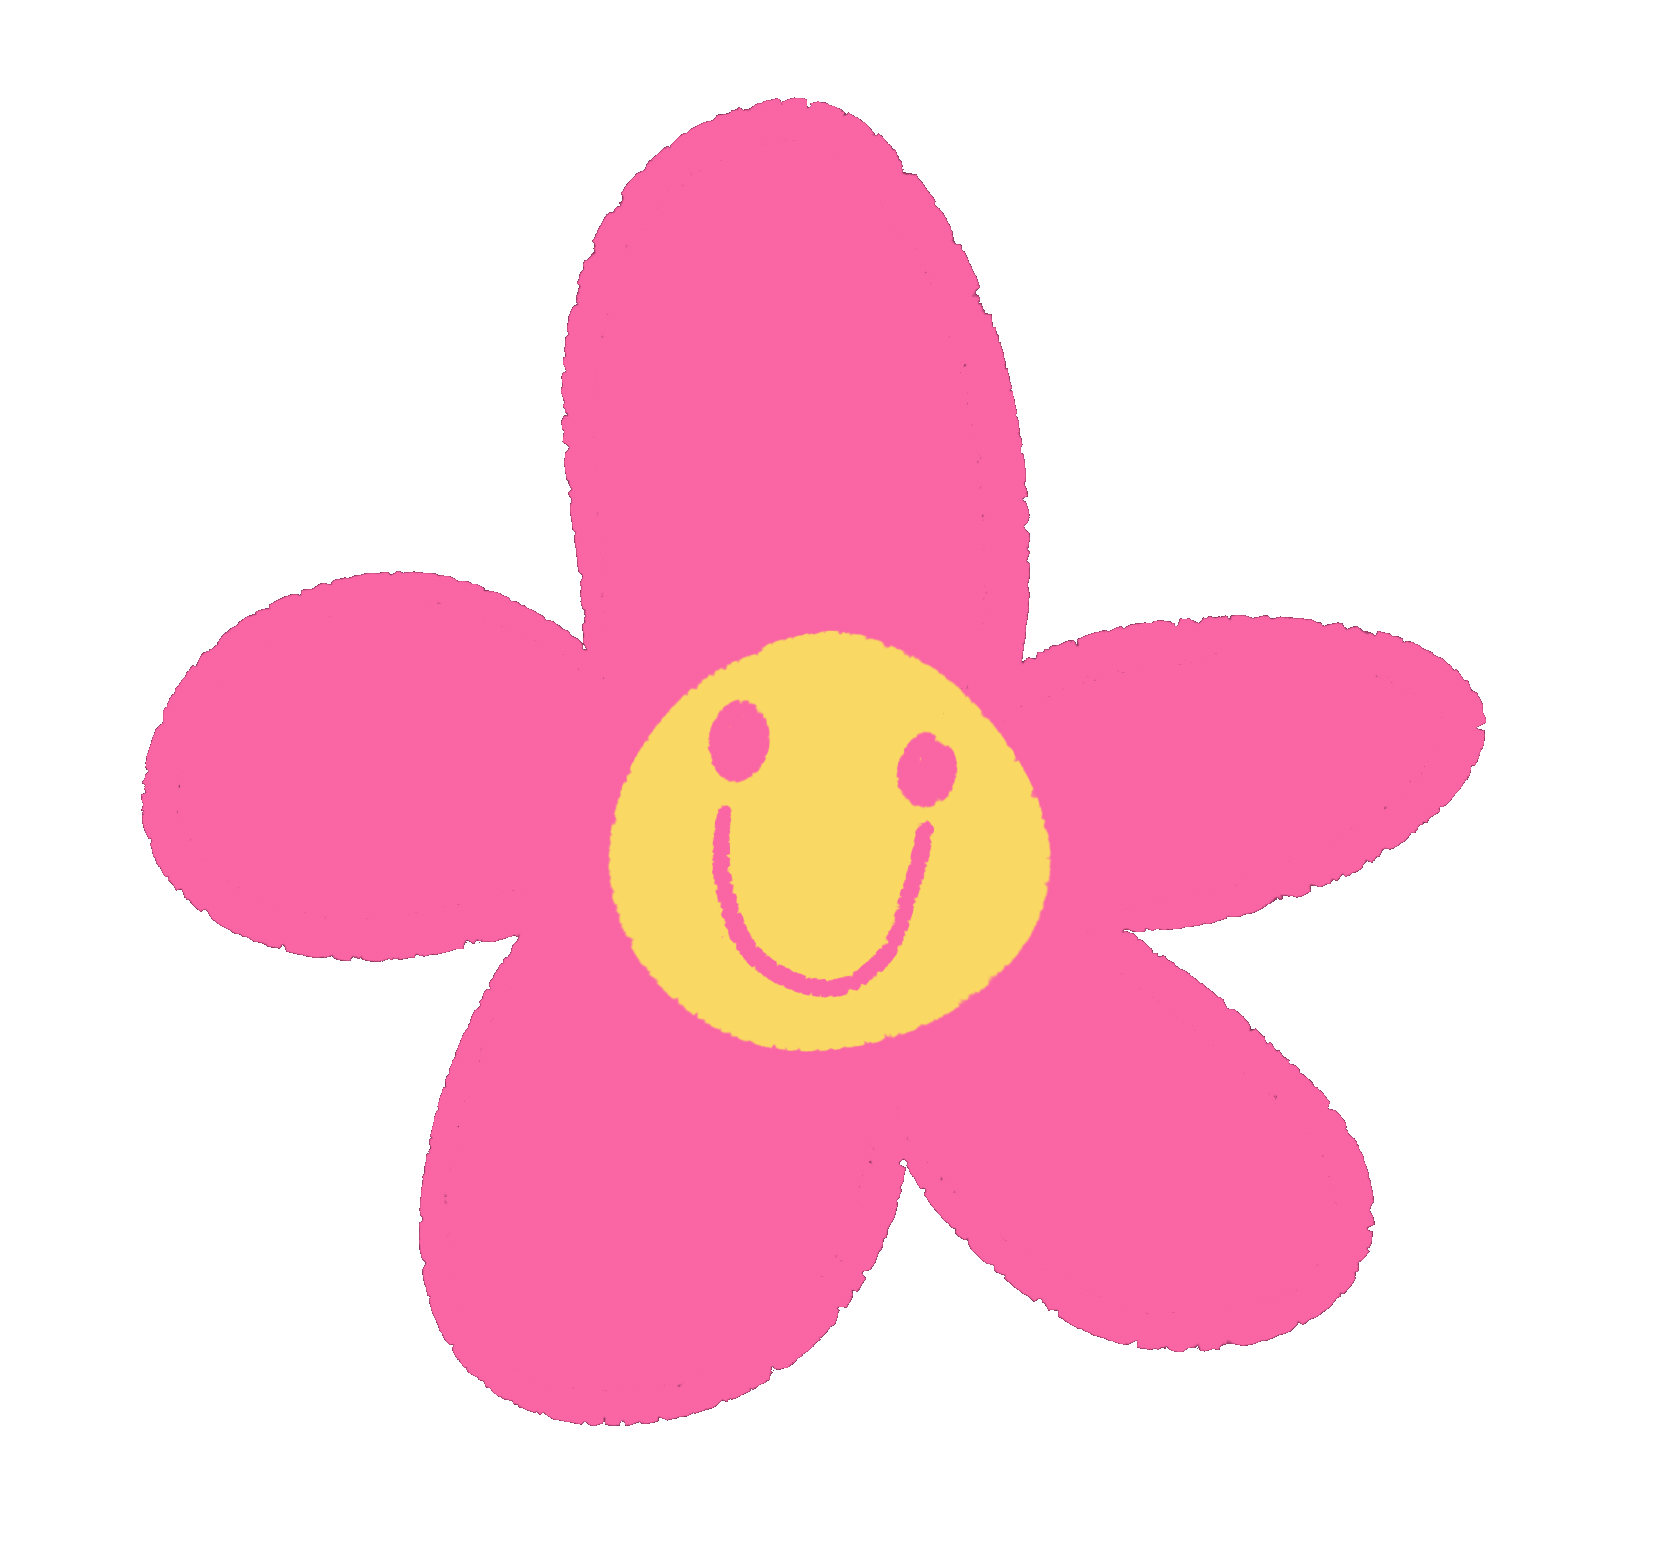 Flower Gif Animated Pictures | Best Flower Site